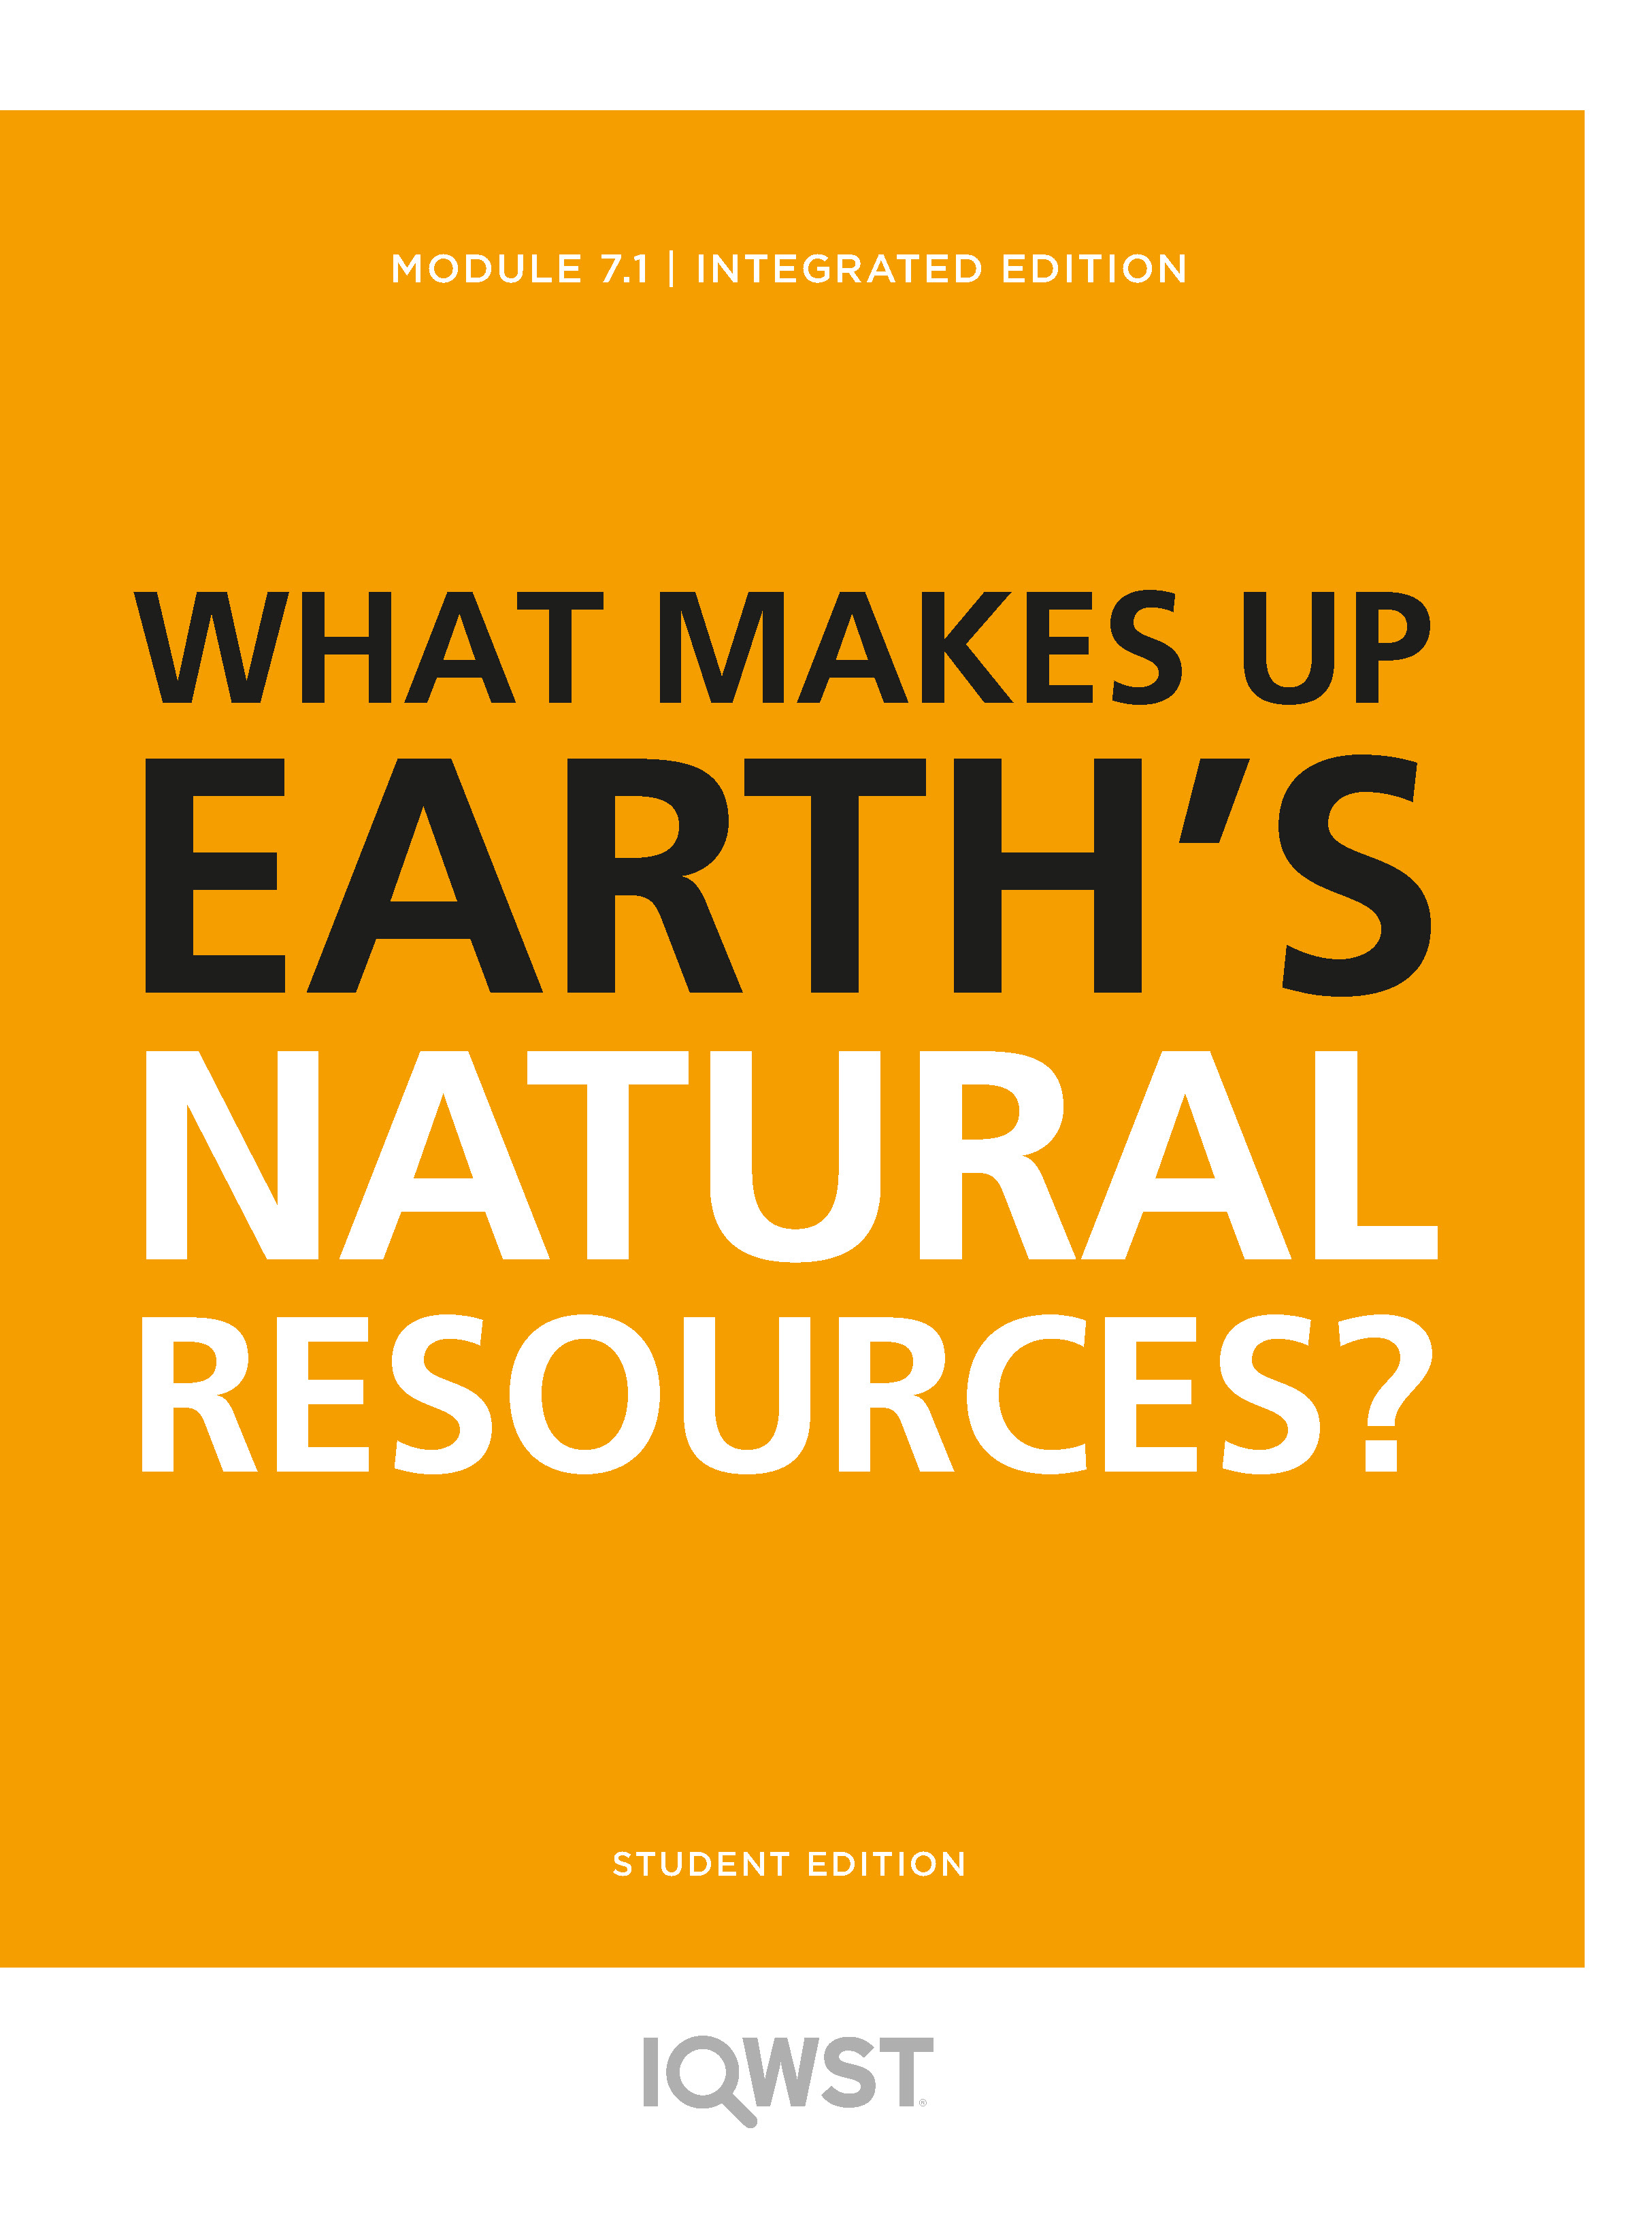 7.1 What Makes Up Earth’s Natural Resources?